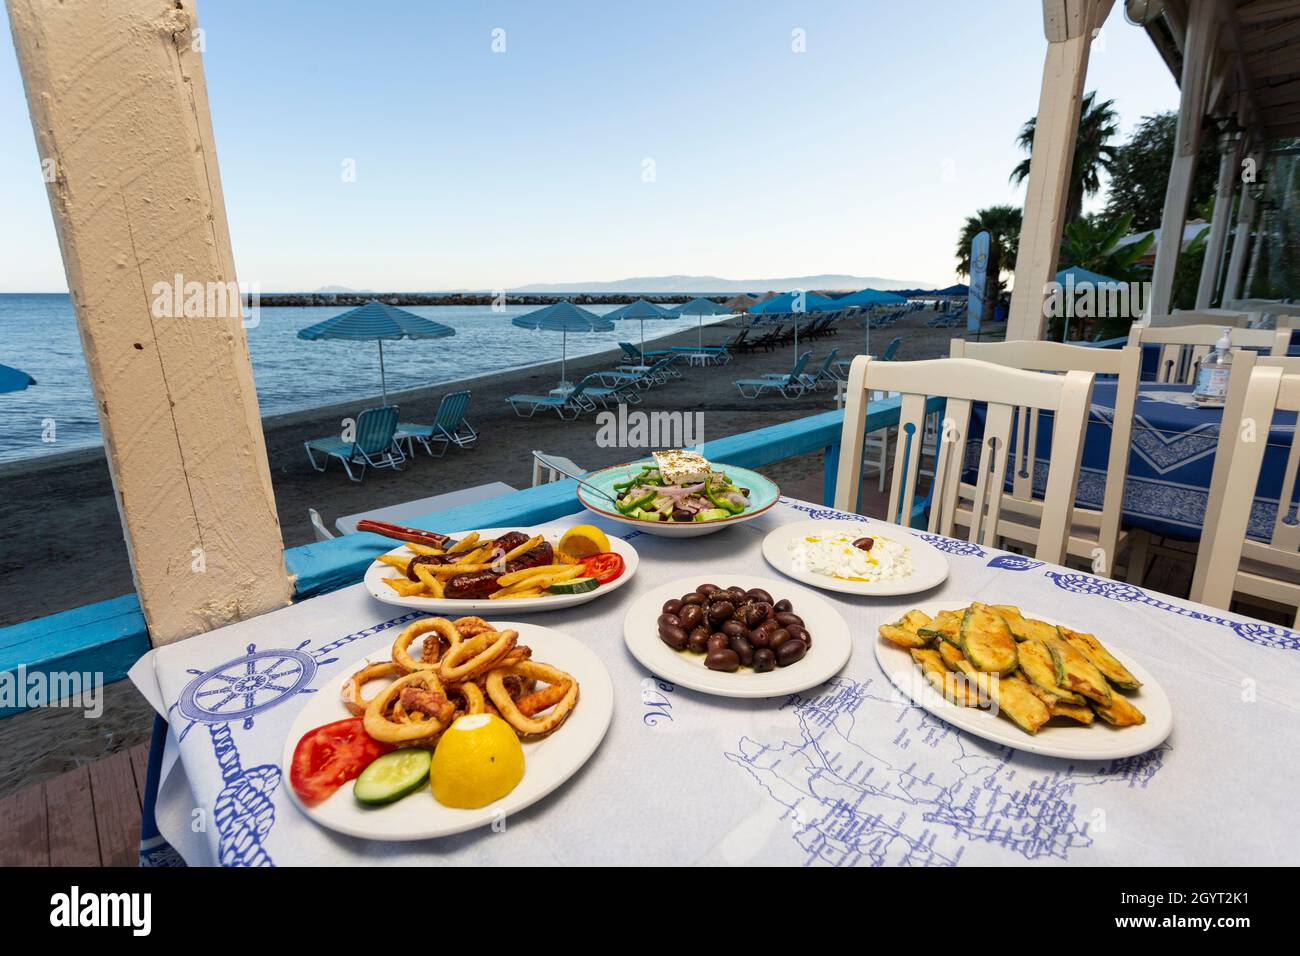 A range of traditional Greek food dishes on the table of a waterfront taverna in Katelios, Kefalonia, Ionian Islands, Greece Stock Photo